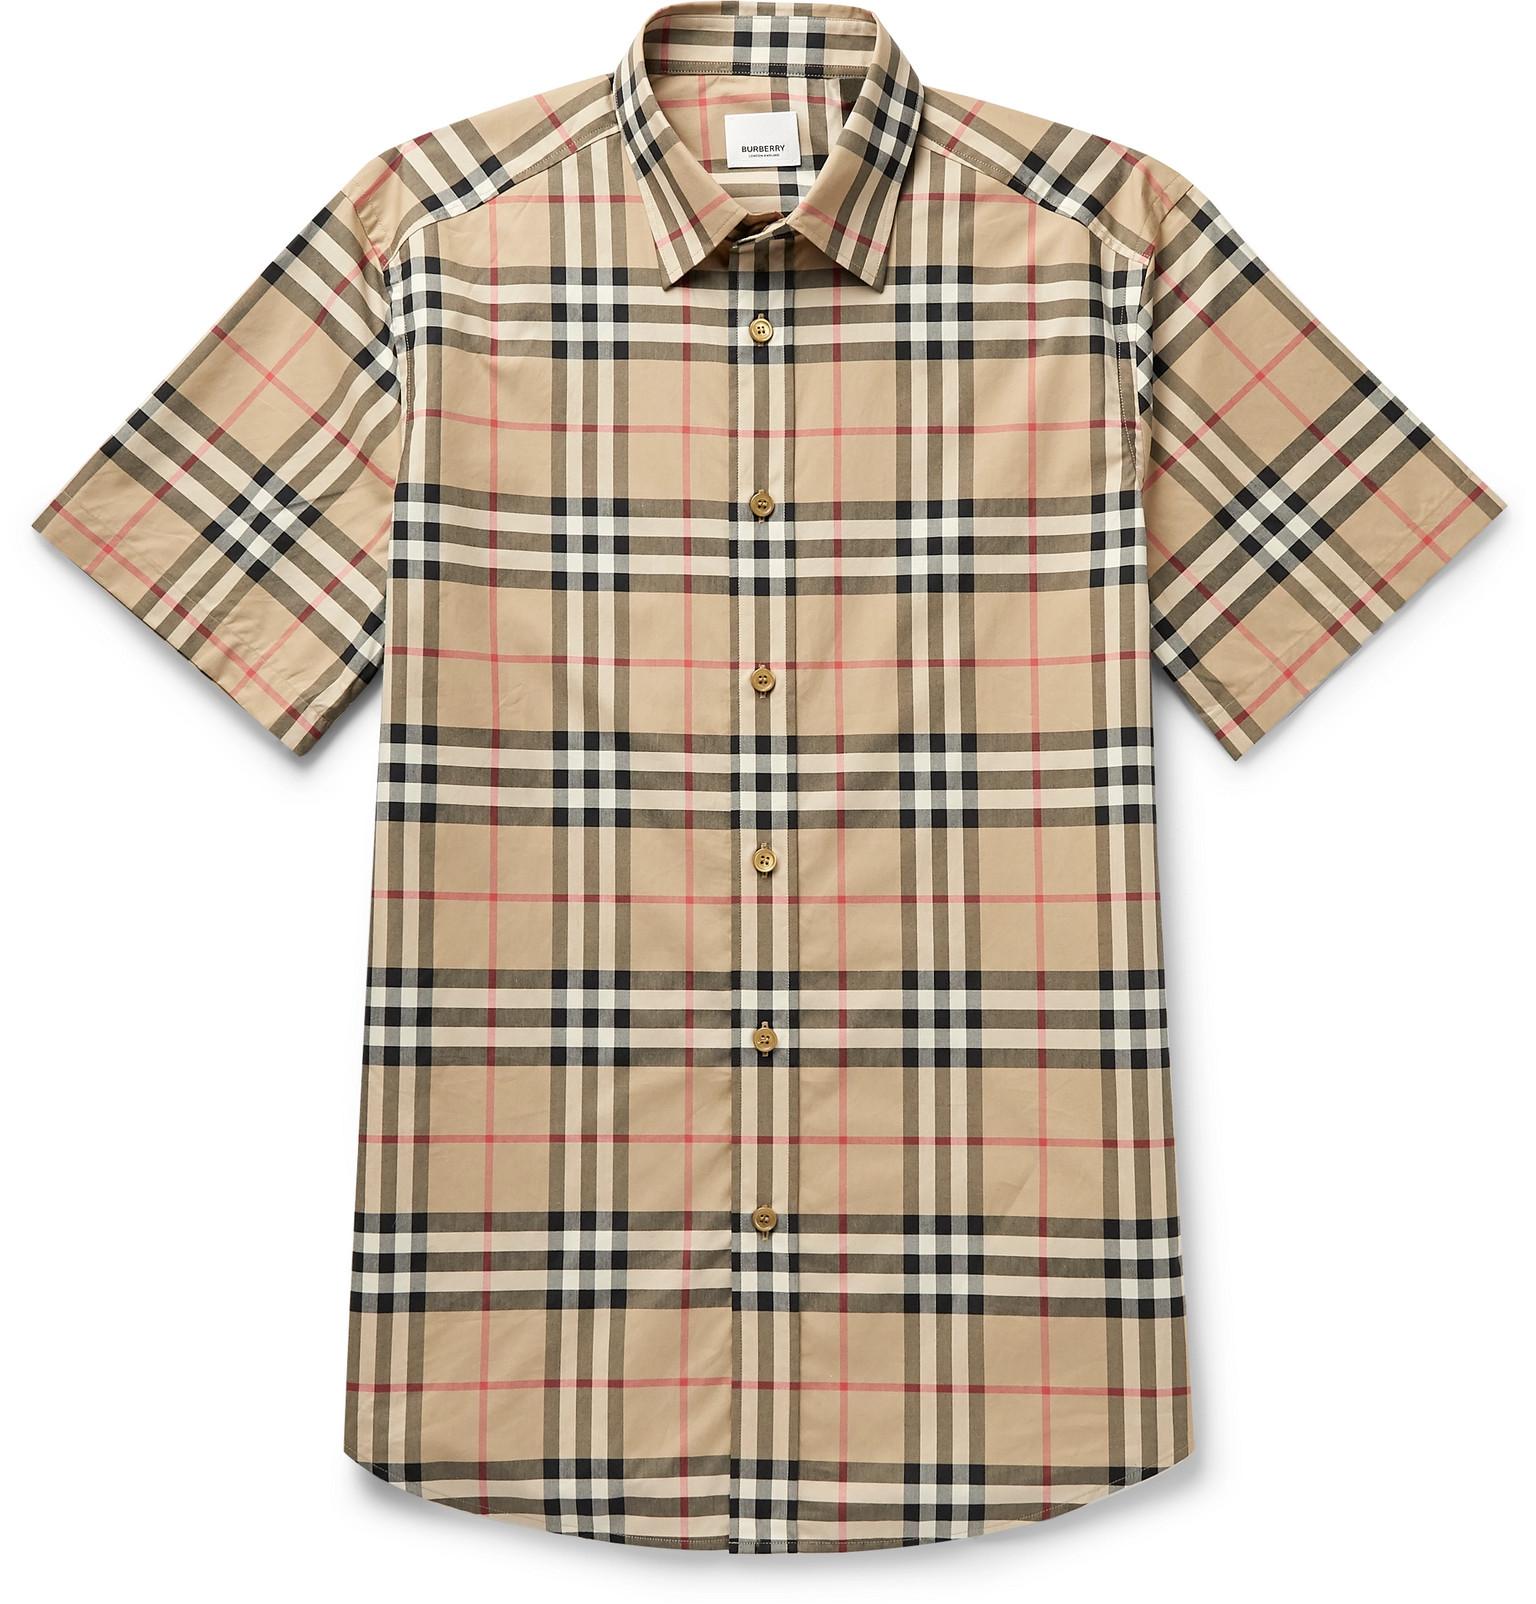 Burberry Checked Cotton-poplin Shirt in Brown for Men - Lyst